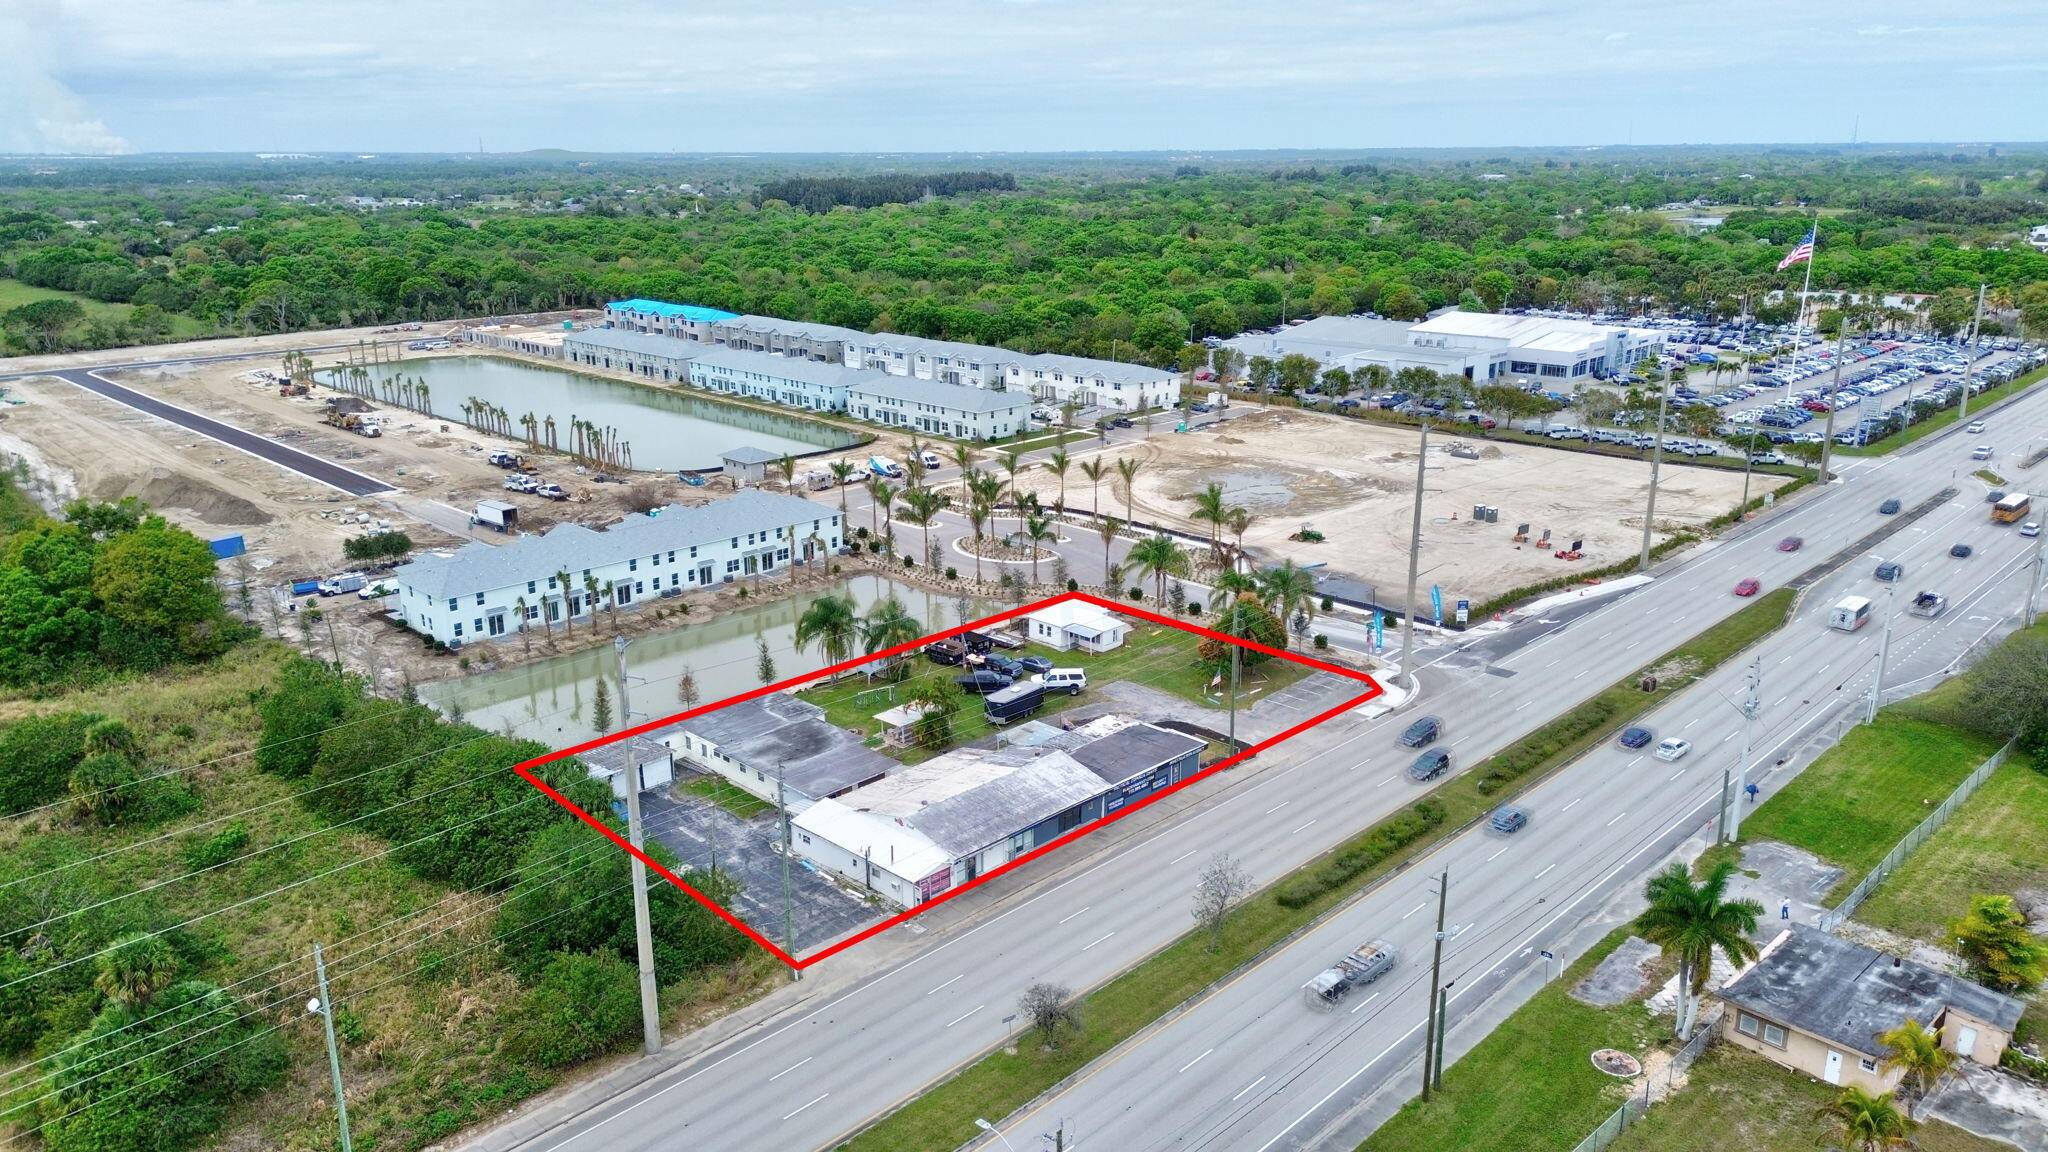 Fantastic opportunity to purchase this commercial property on US 1 in desirable southern Fort Pierce which is surrounded by car dealerships and brand new housing development.